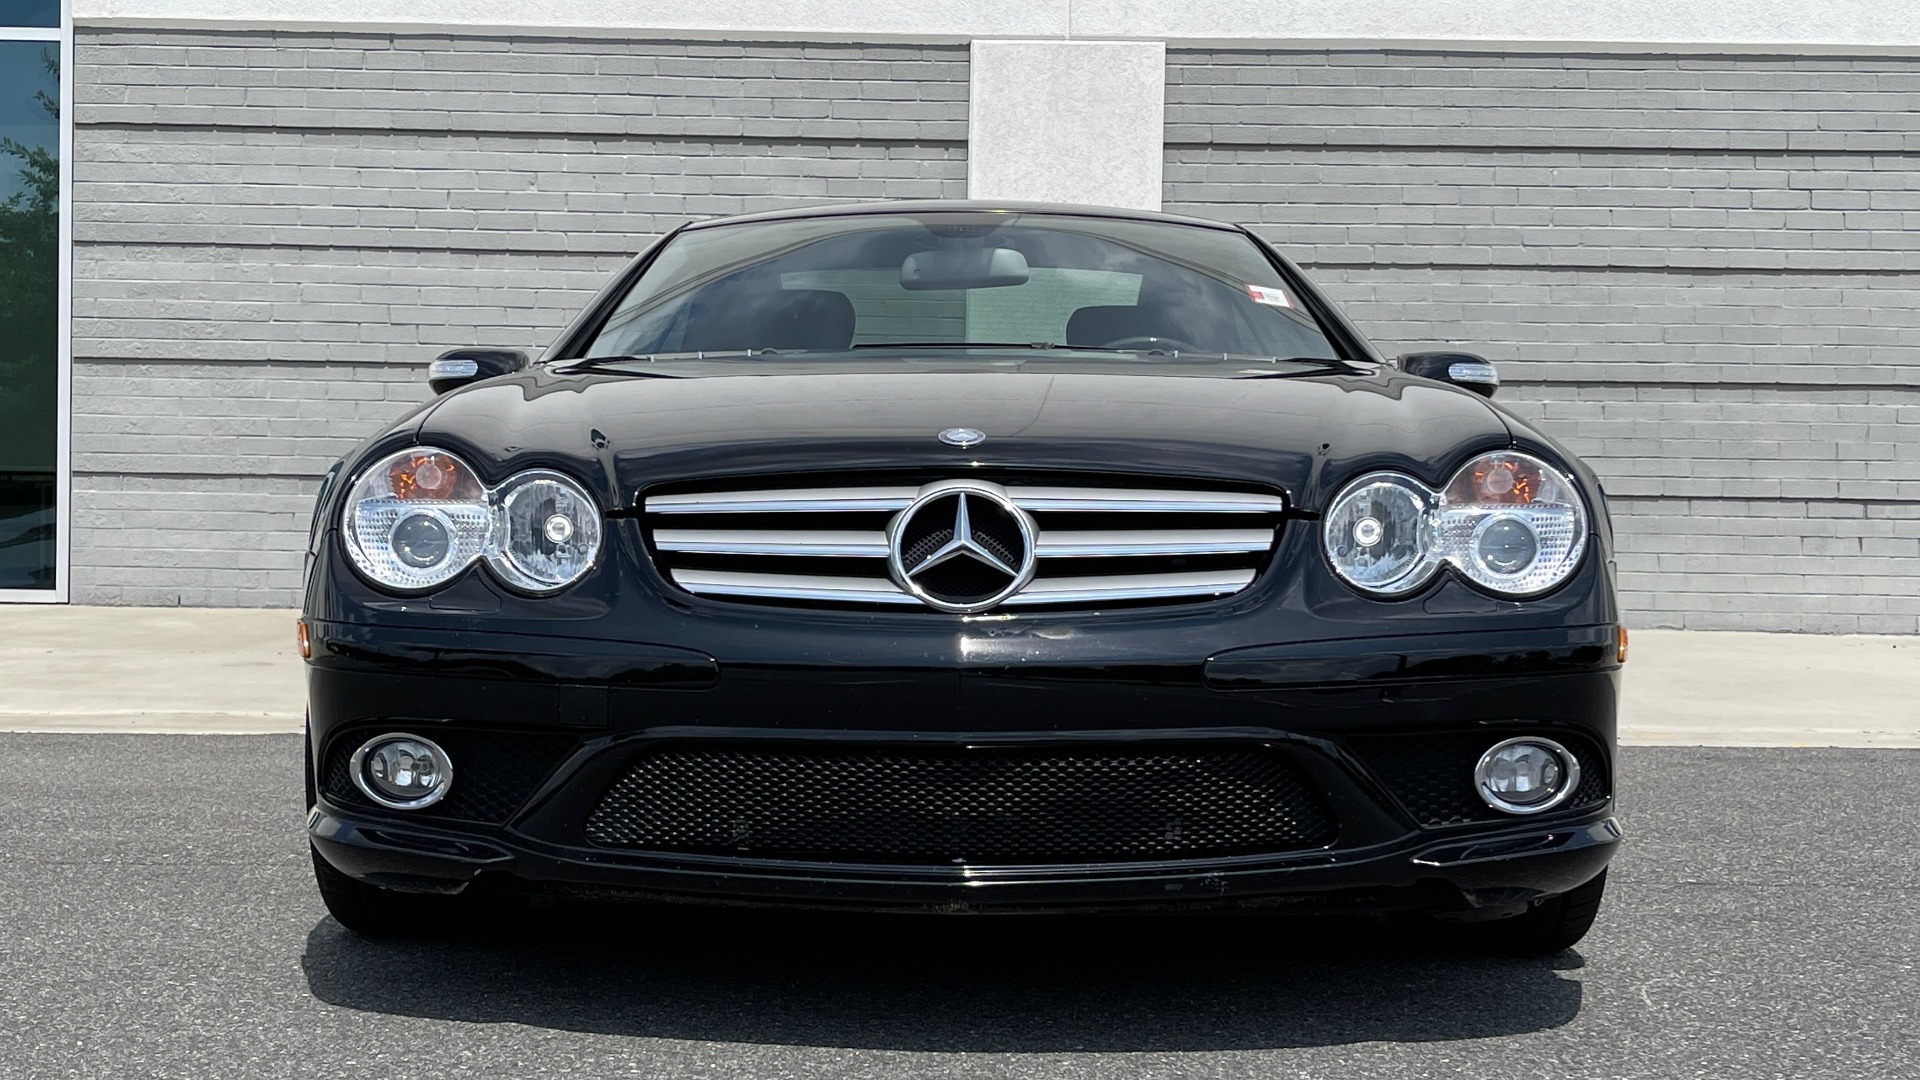 Used 2007 Mercedes-Benz SL-CLASS SL550 ROADSTER / 5.5L V8 / AMG SPORT PKG / BI-XENON HEADLAMPS for sale Sold at Formula Imports in Charlotte NC 28227 19